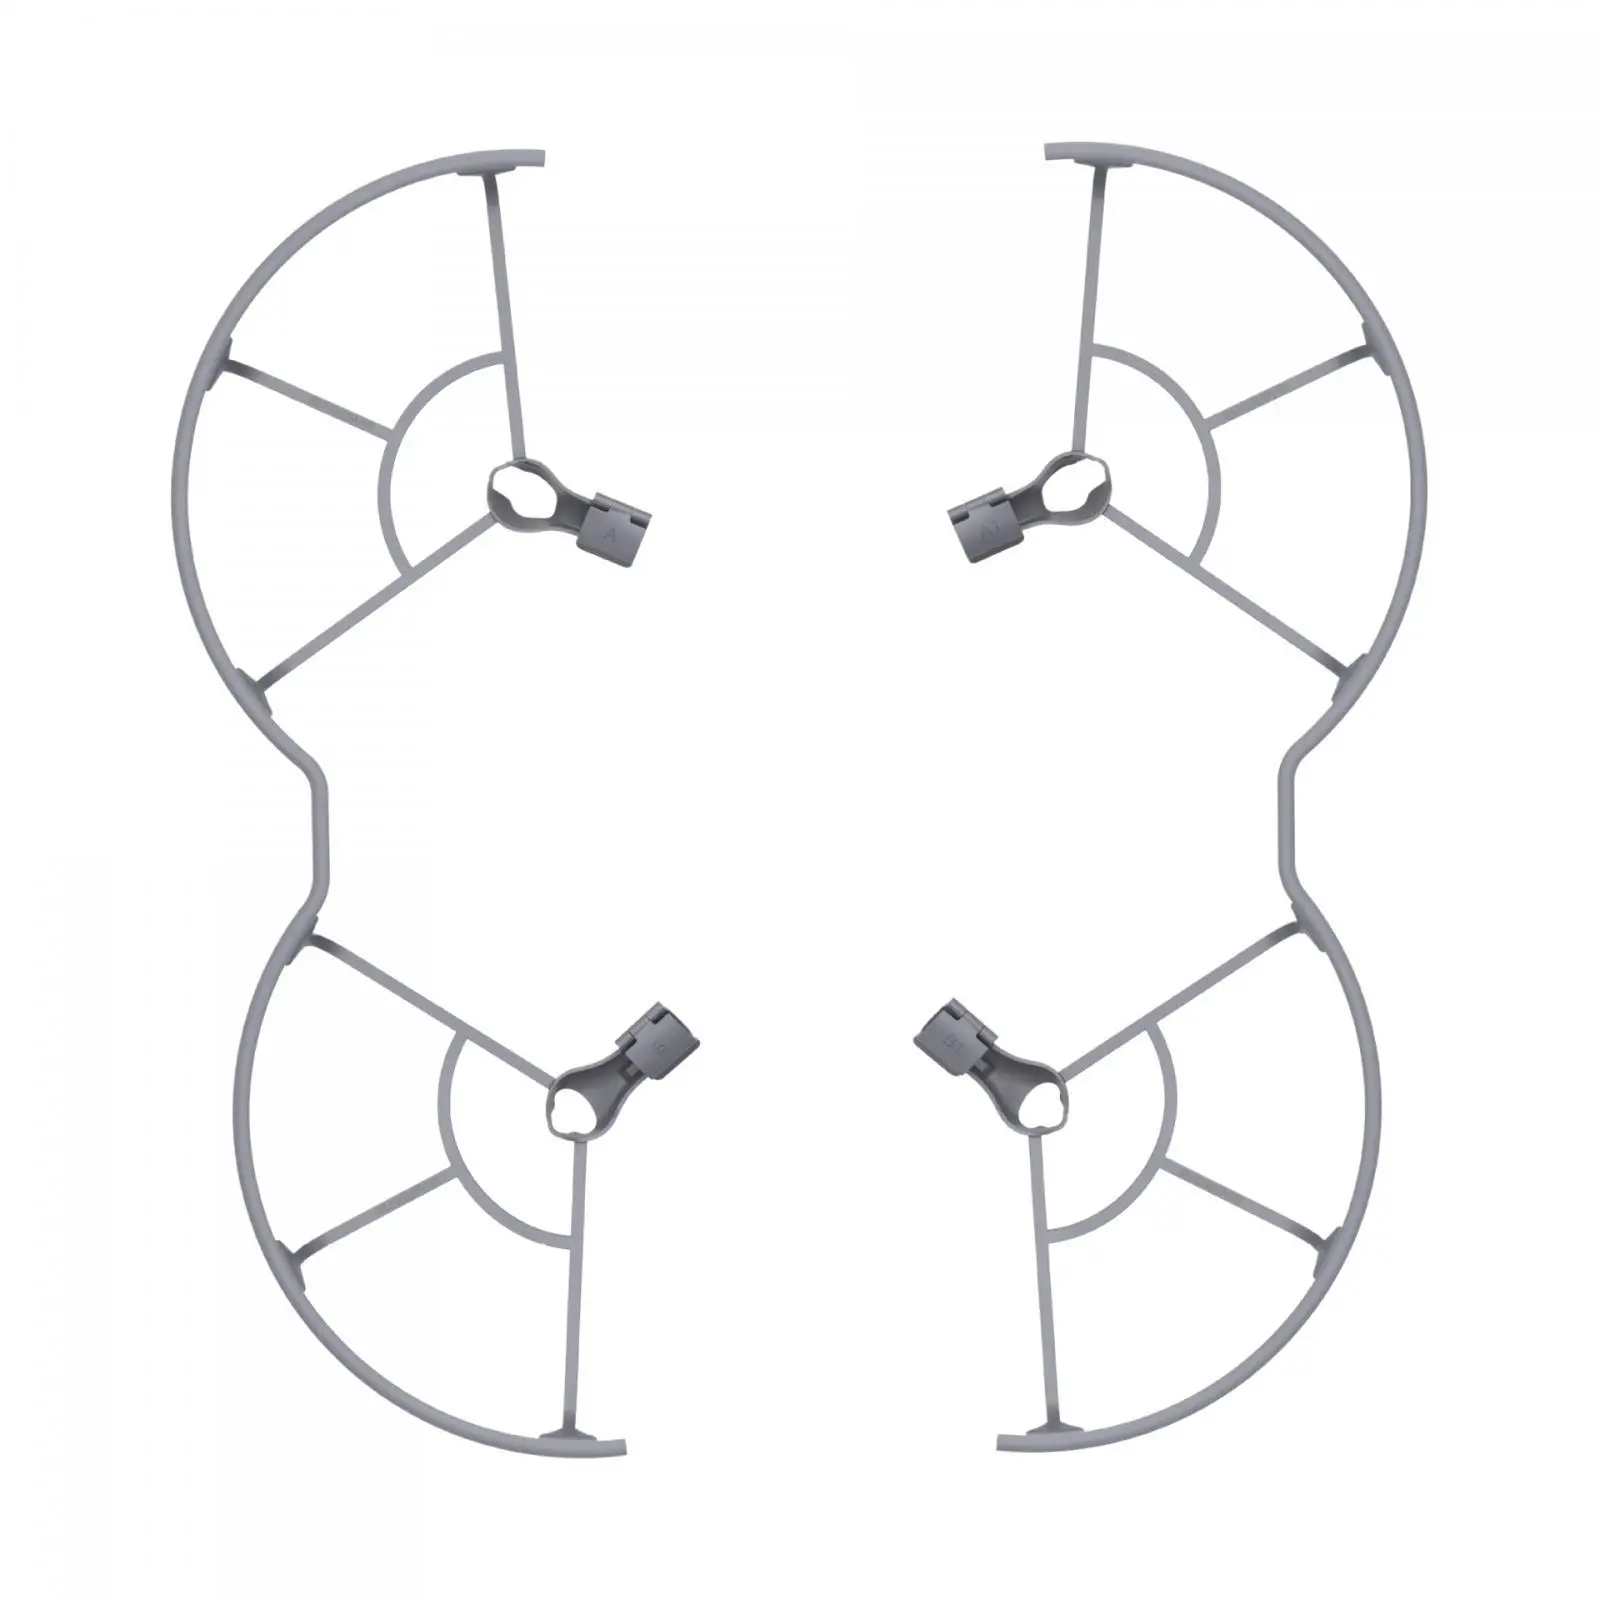 Propeller Guards Professional Lightweight Quick Release Semi Enclosed for Air 3 Drone Accessories Accessories Replacement